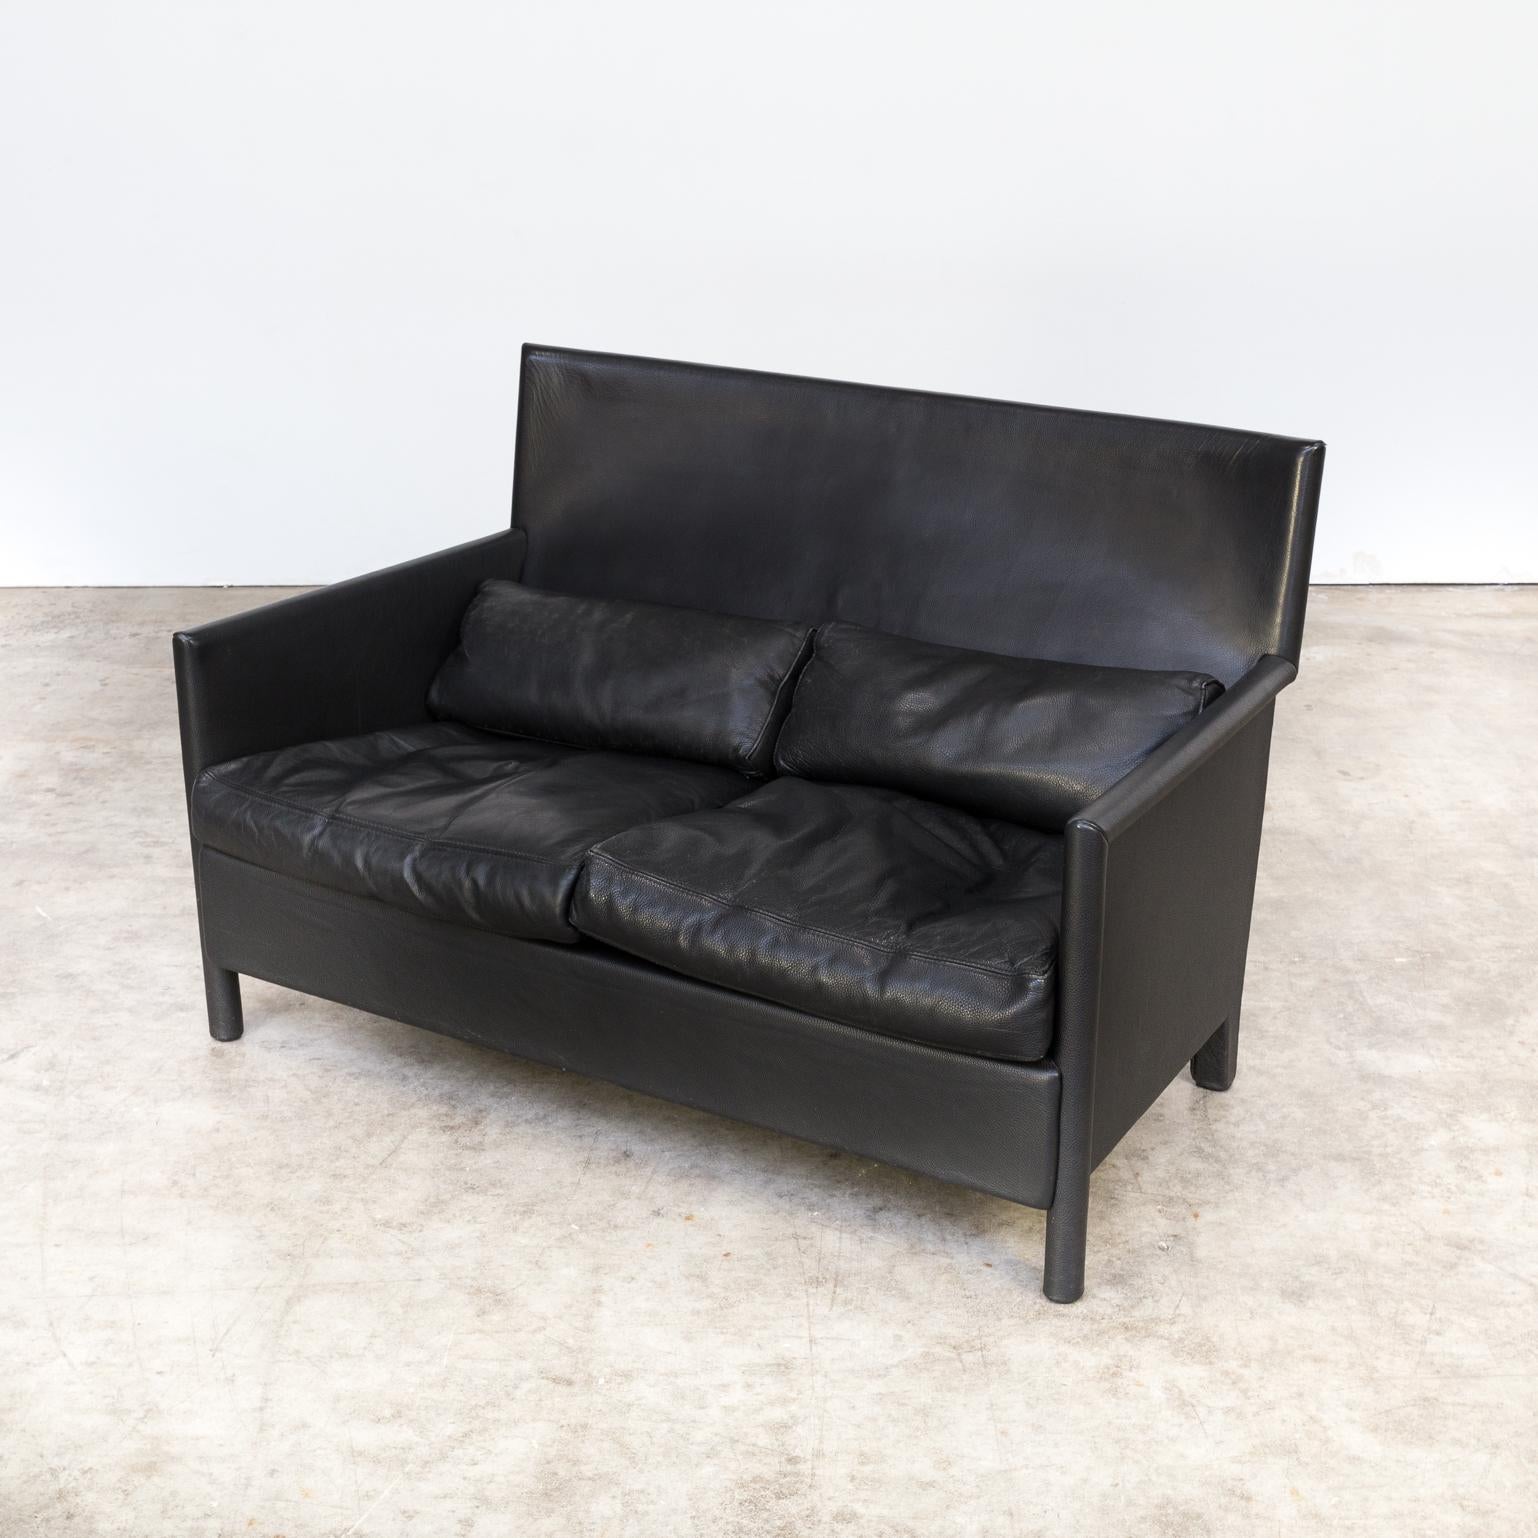 Molteni & C Black Leather Double Seat Sofa In Good Condition For Sale In Amstelveen, Noord